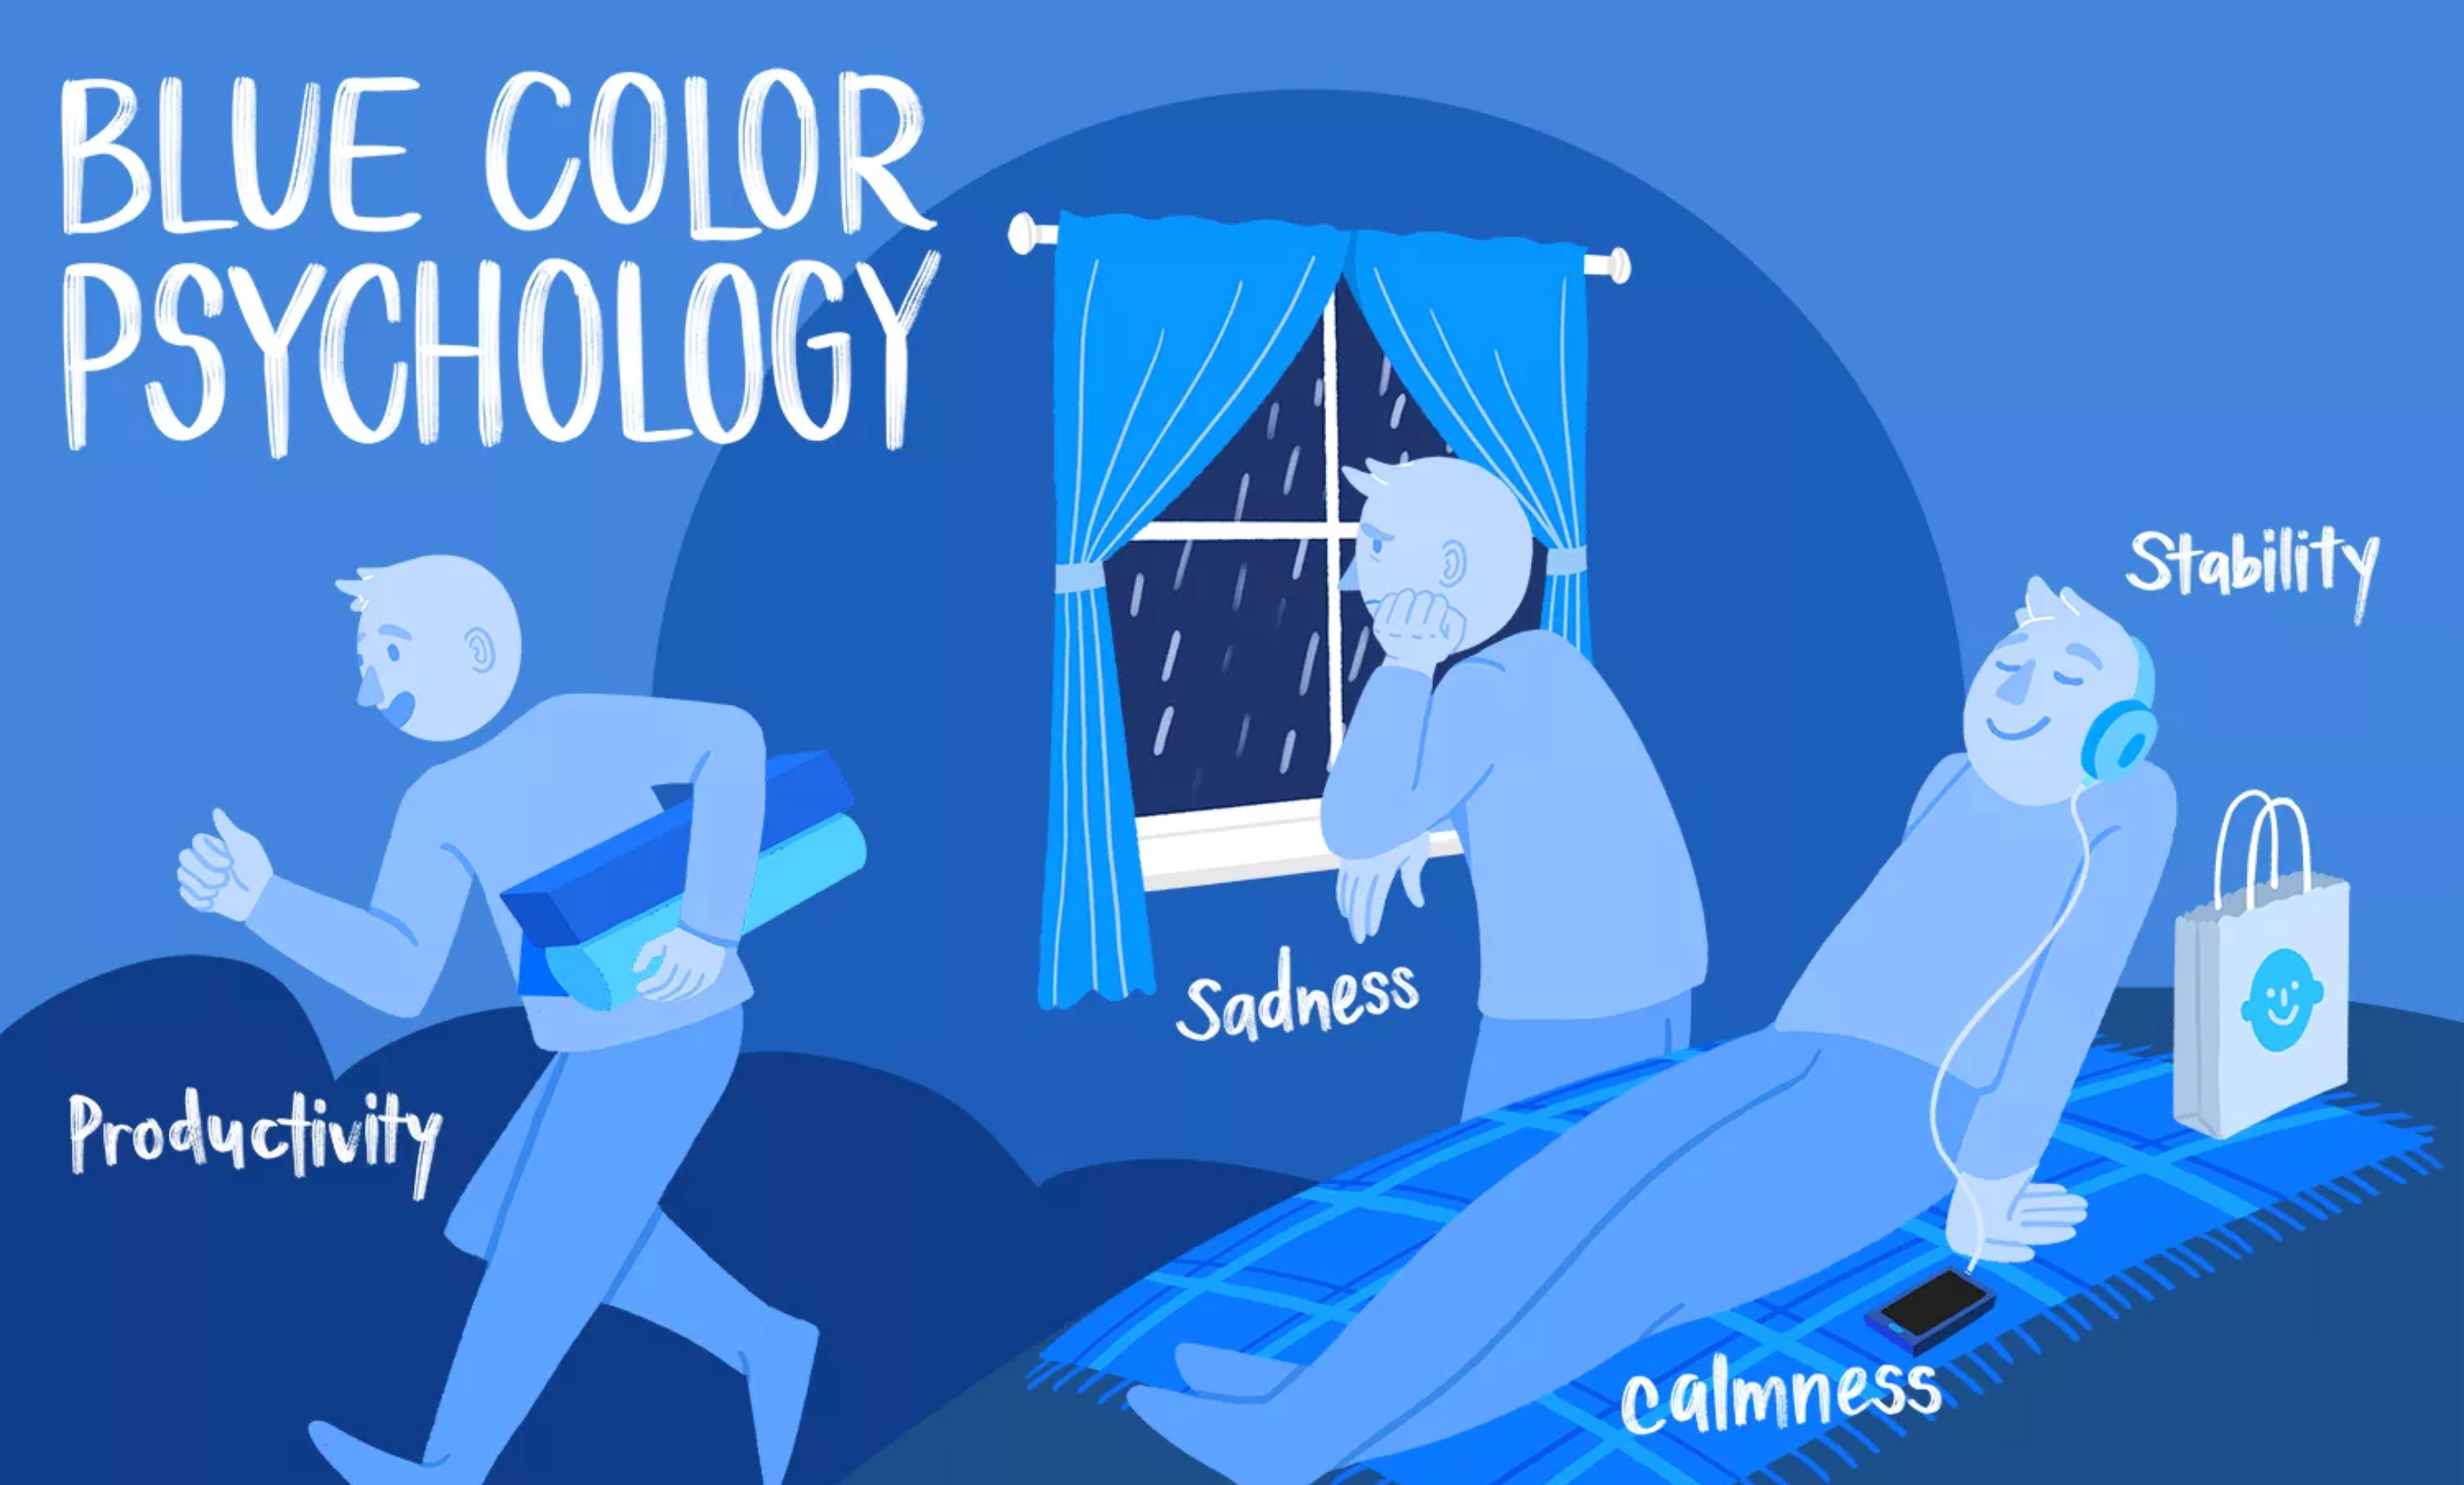 7. "The Psychology of Blue Hair: How Science Shows It Can Affect Mood and Perception" - wide 6